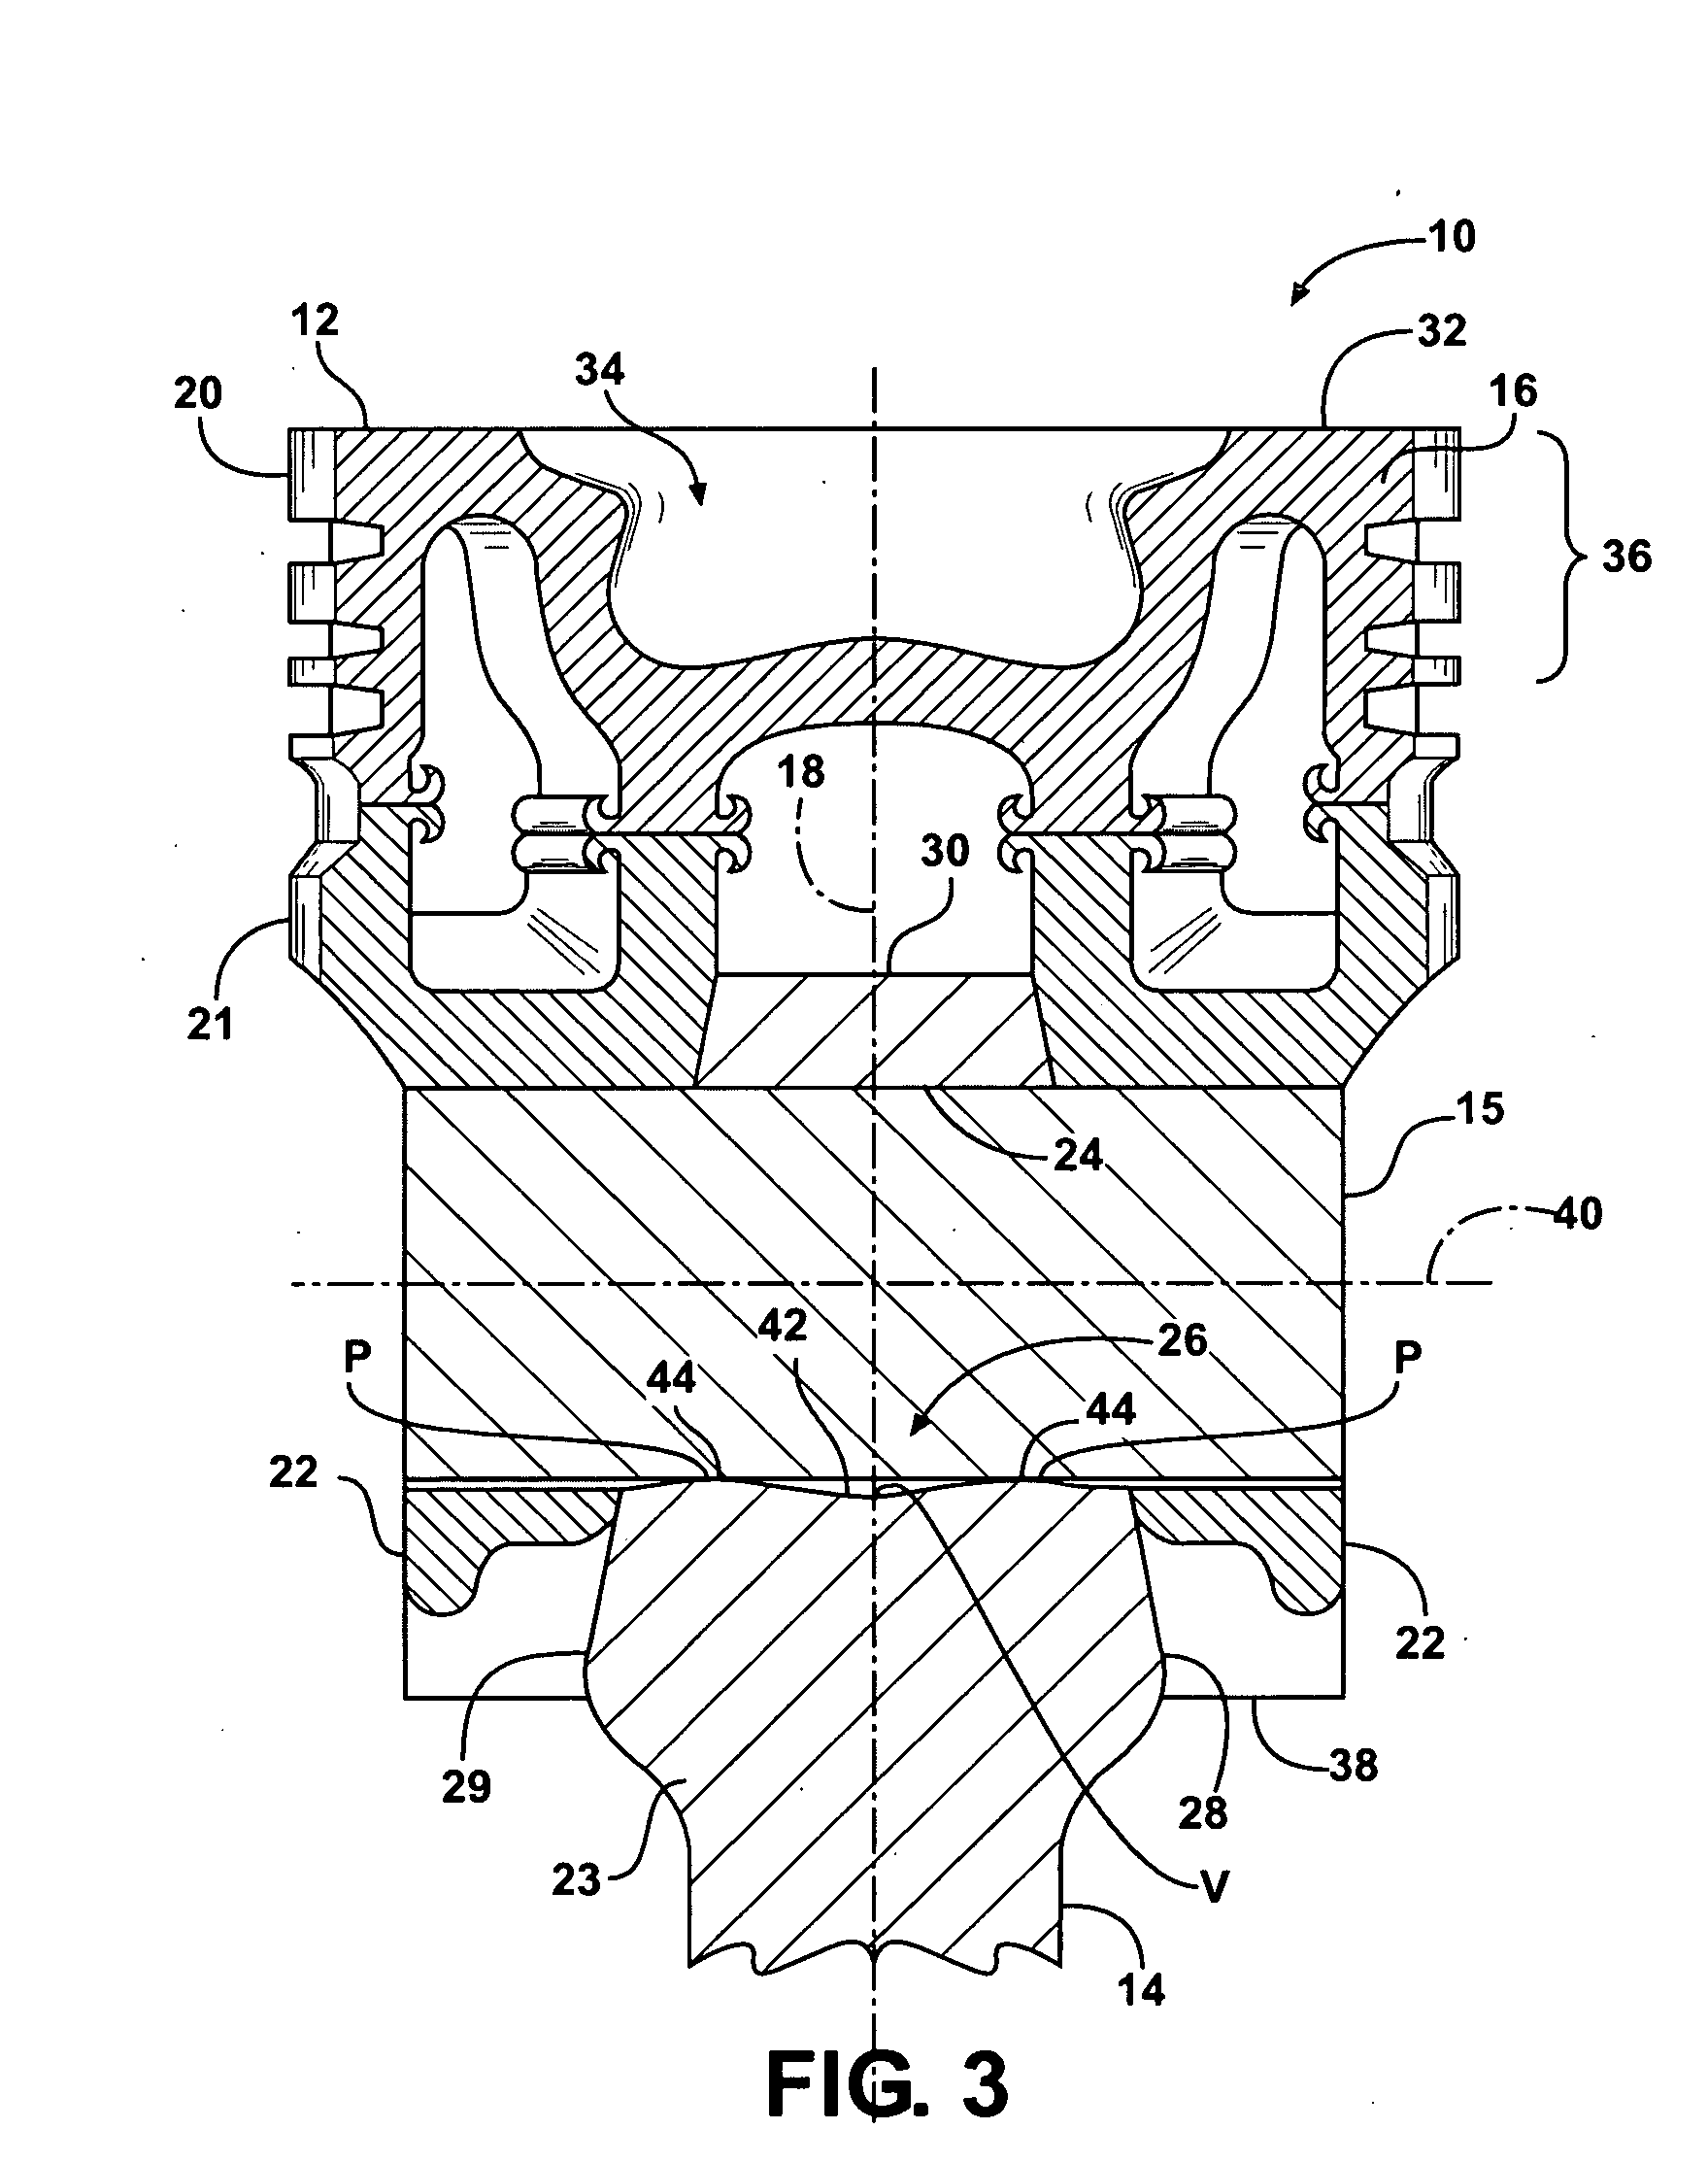 Piston assembly and connecting rod having a profiled wrist pin bore therefor